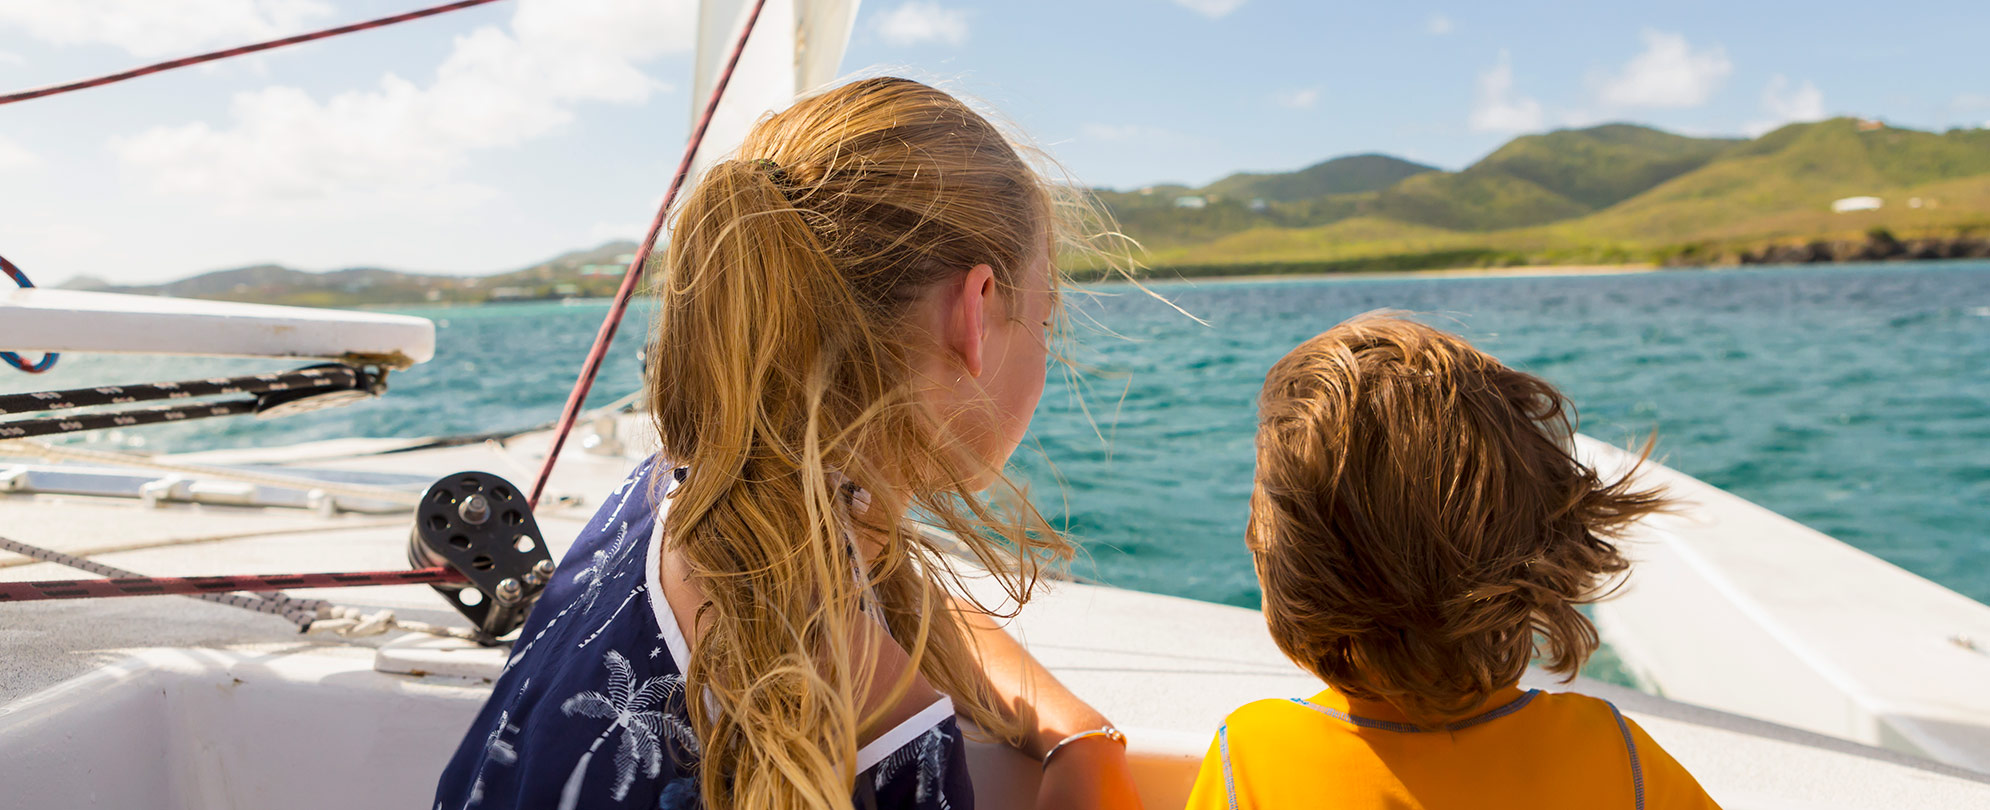 A young boy and girl on a sailboat with small hills in the background in the Virgin Islands National Park.